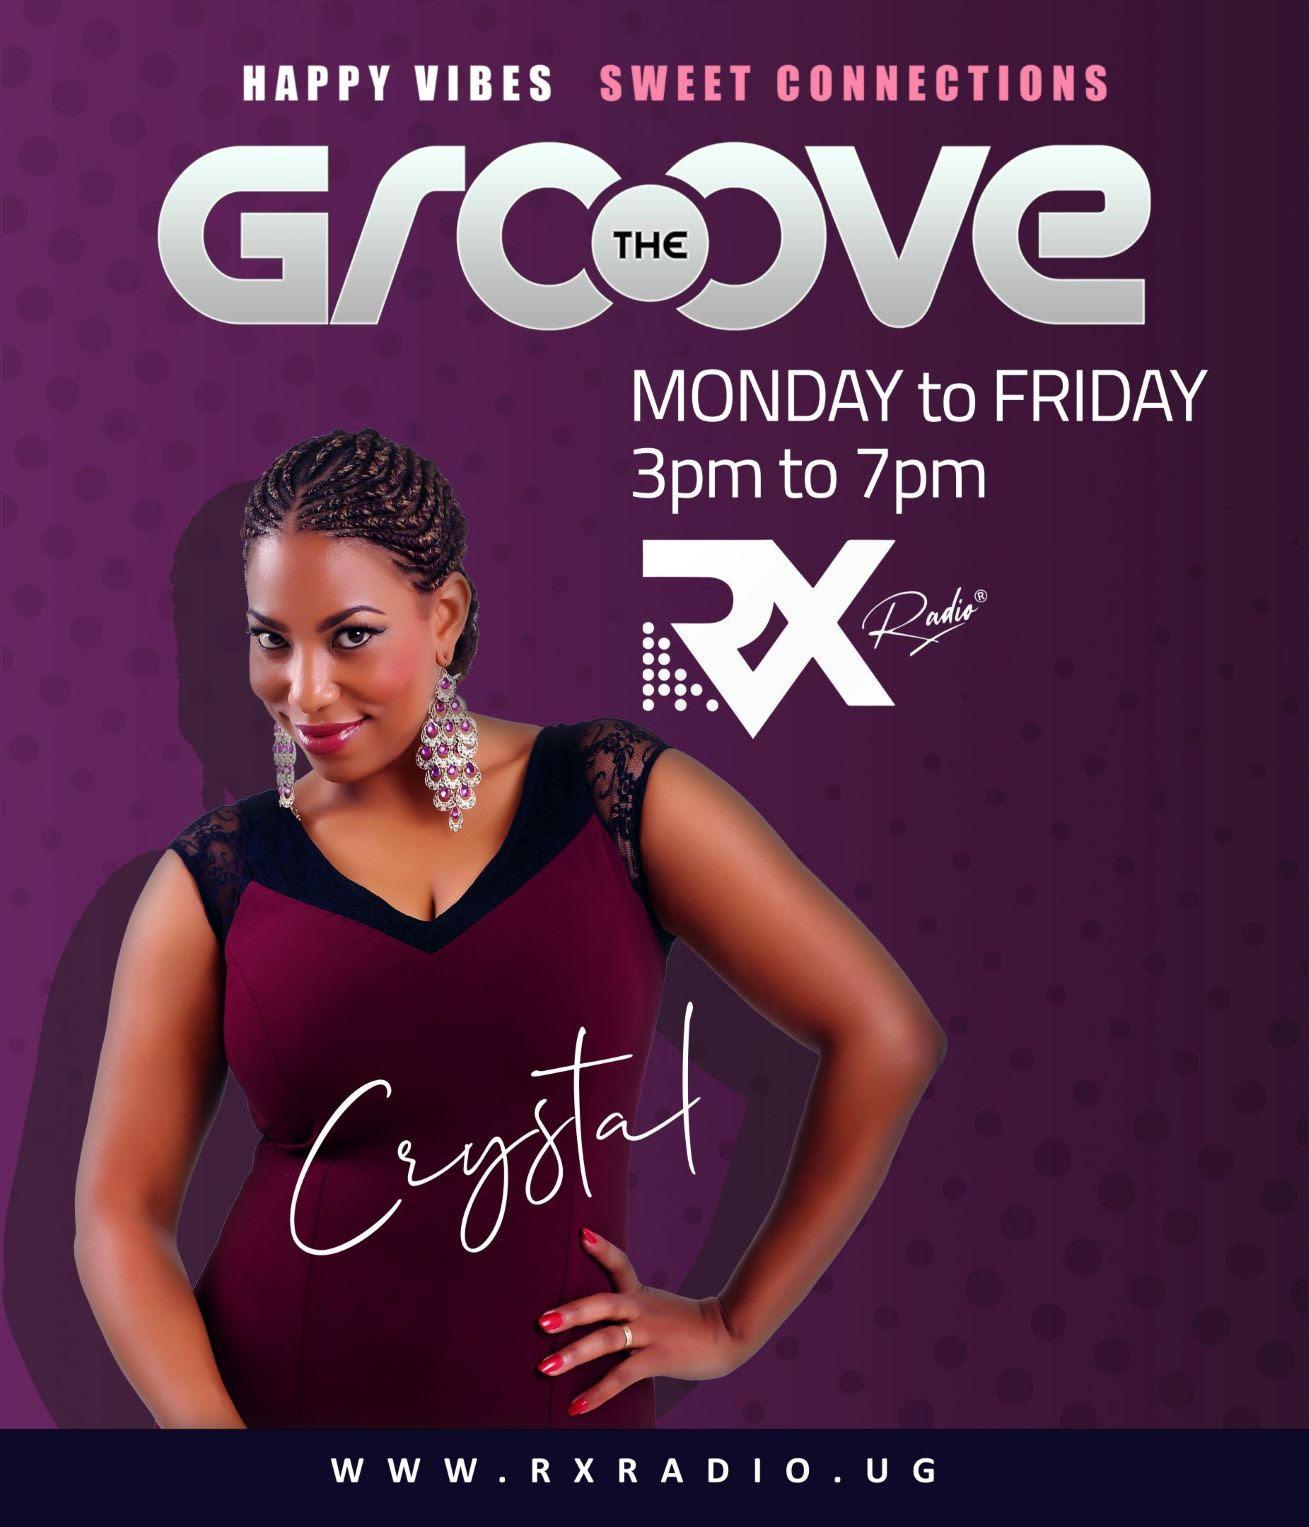 THE GROOVE with Crystal: Monday to Friday (3.00pm - 7.00pm) 